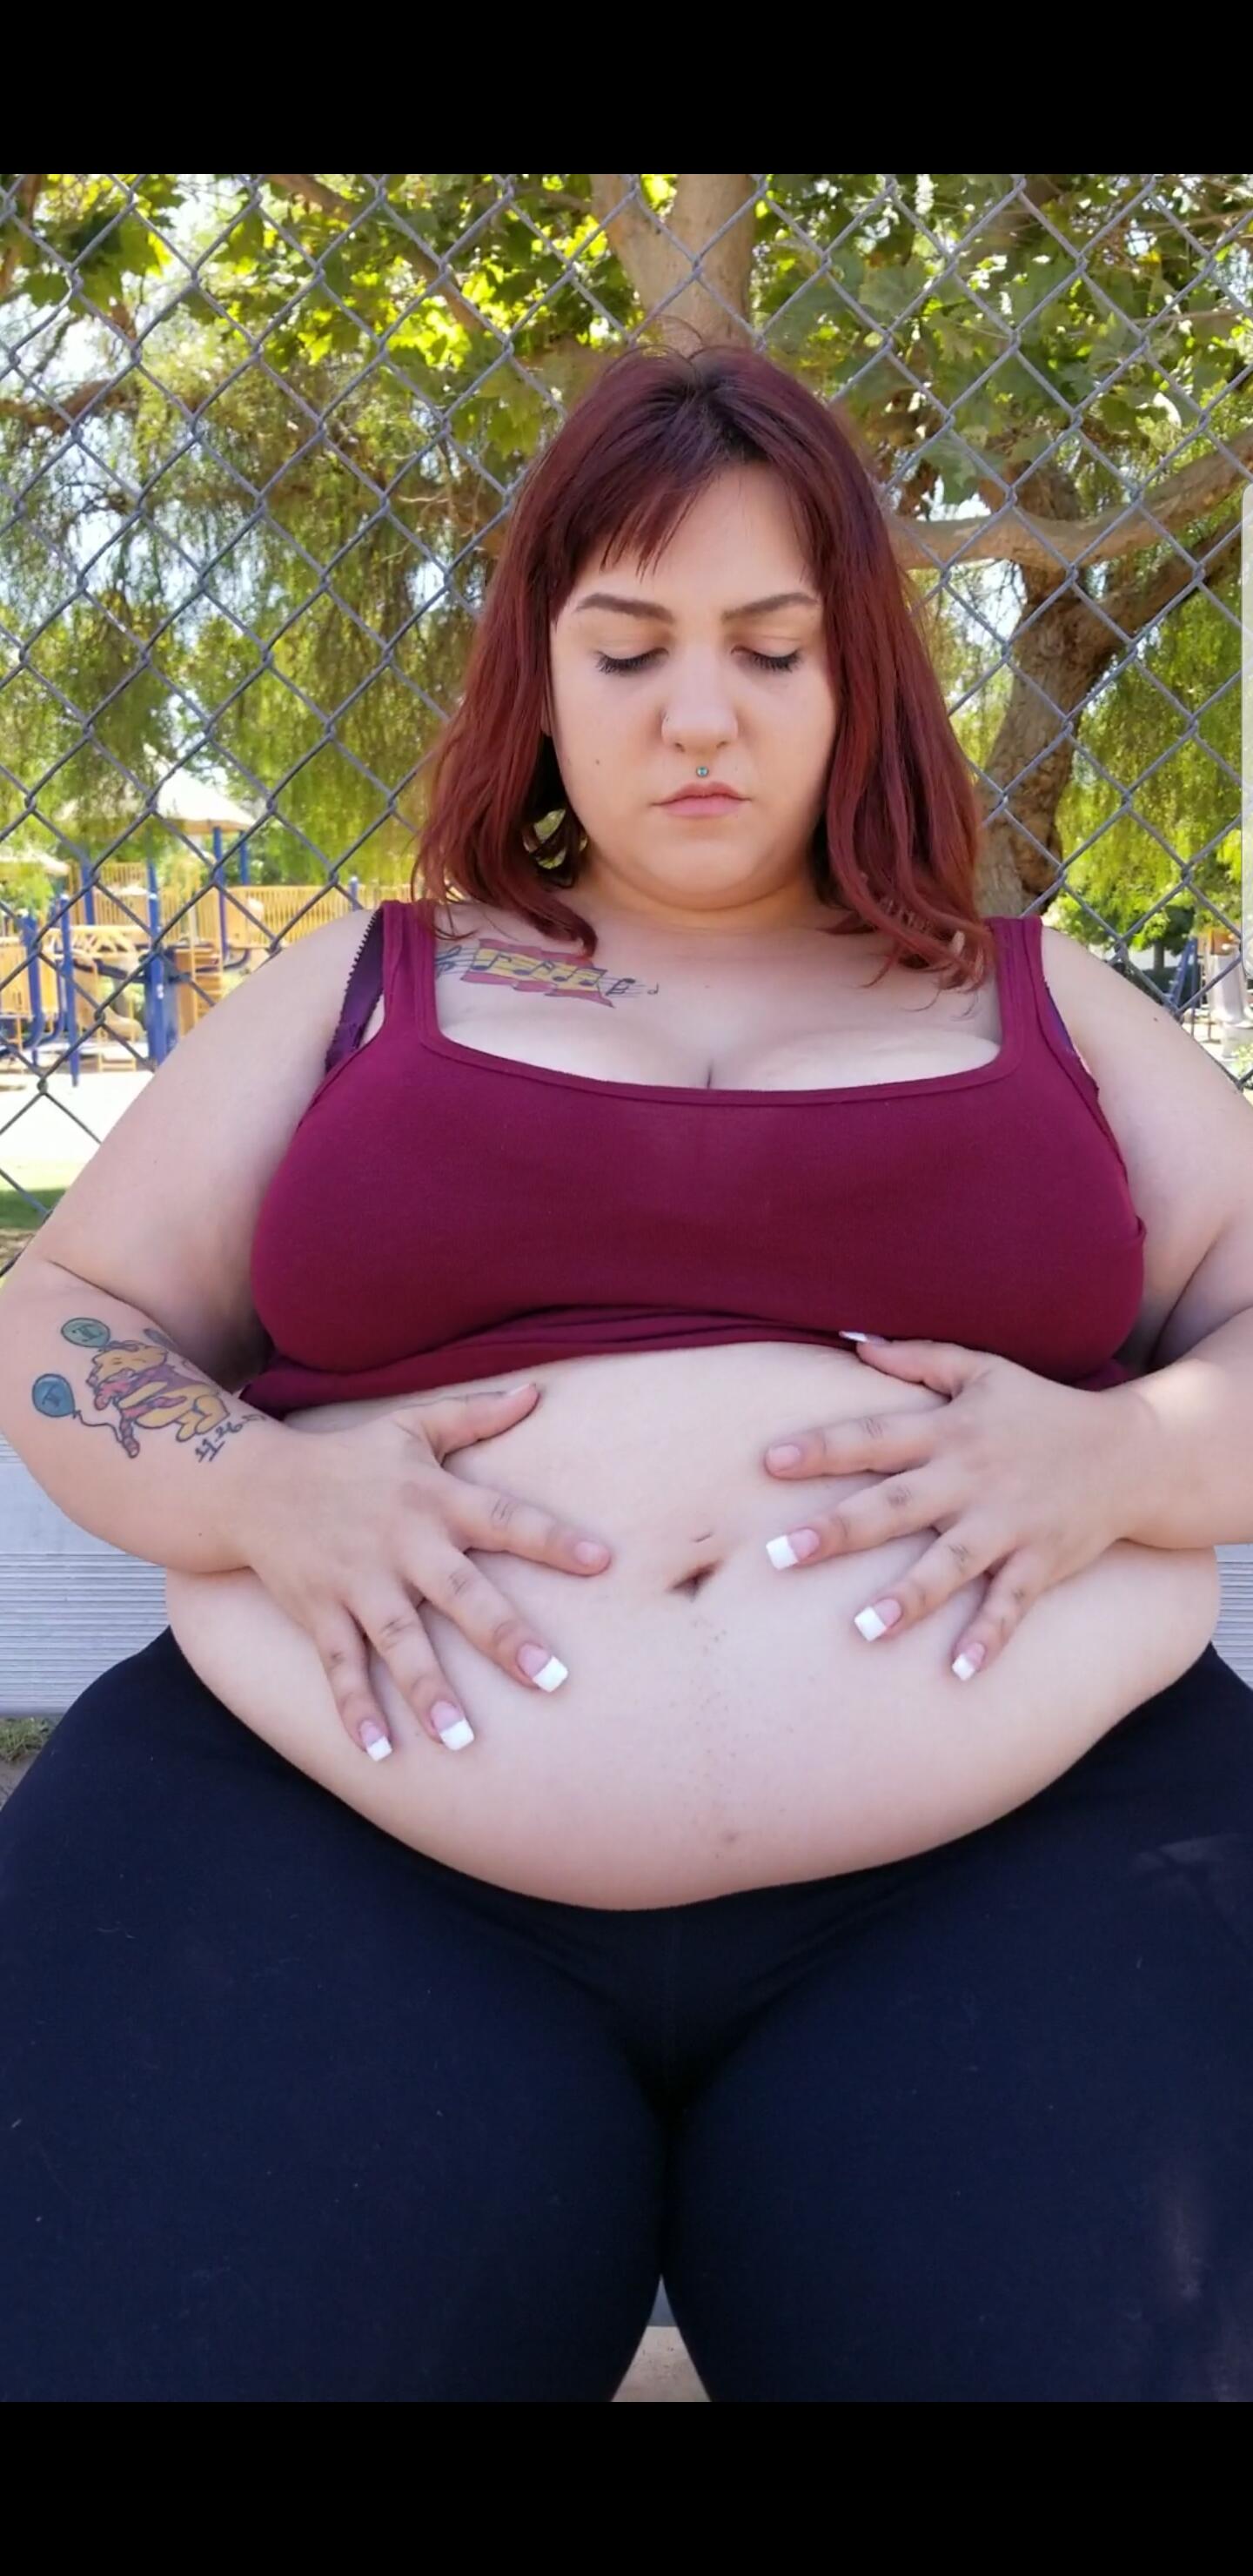 1440px x 2960px - Fat Bbw Girl Belly Play - Hot Sex Images, Best XXX Photos and Free Porn  Pics on www.pornbasic.com